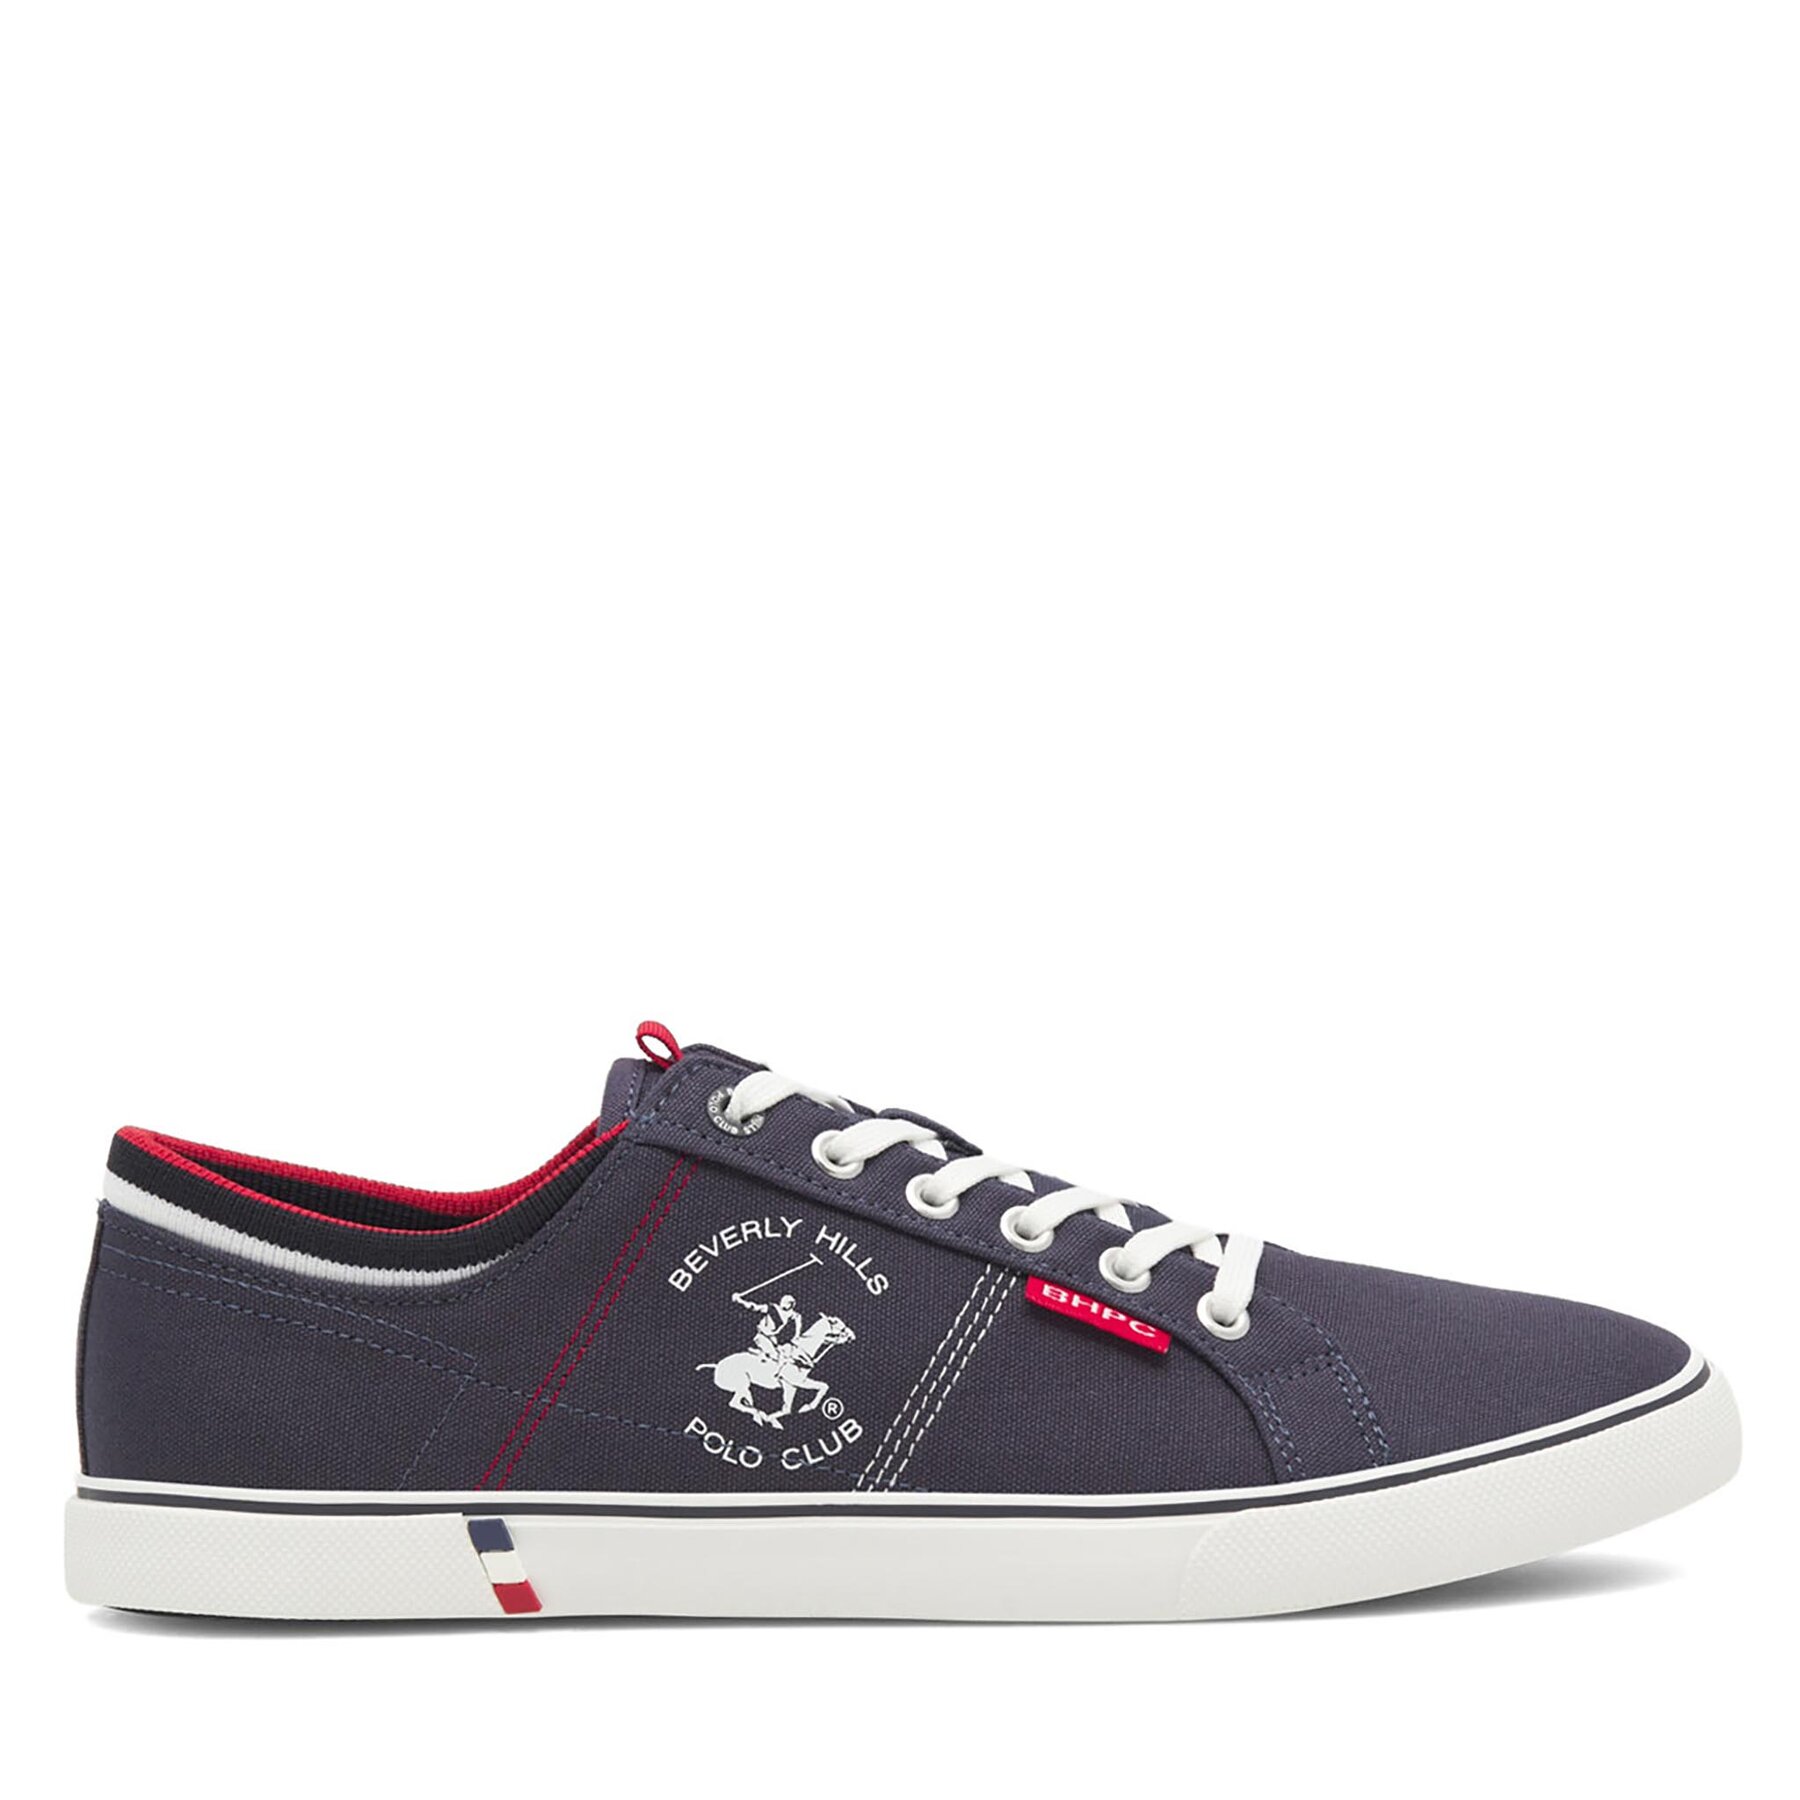 Sneakers aus Stoff Beverly Hills Polo Club M-VSS24010 Dunkelblau von Beverly Hills Polo Club